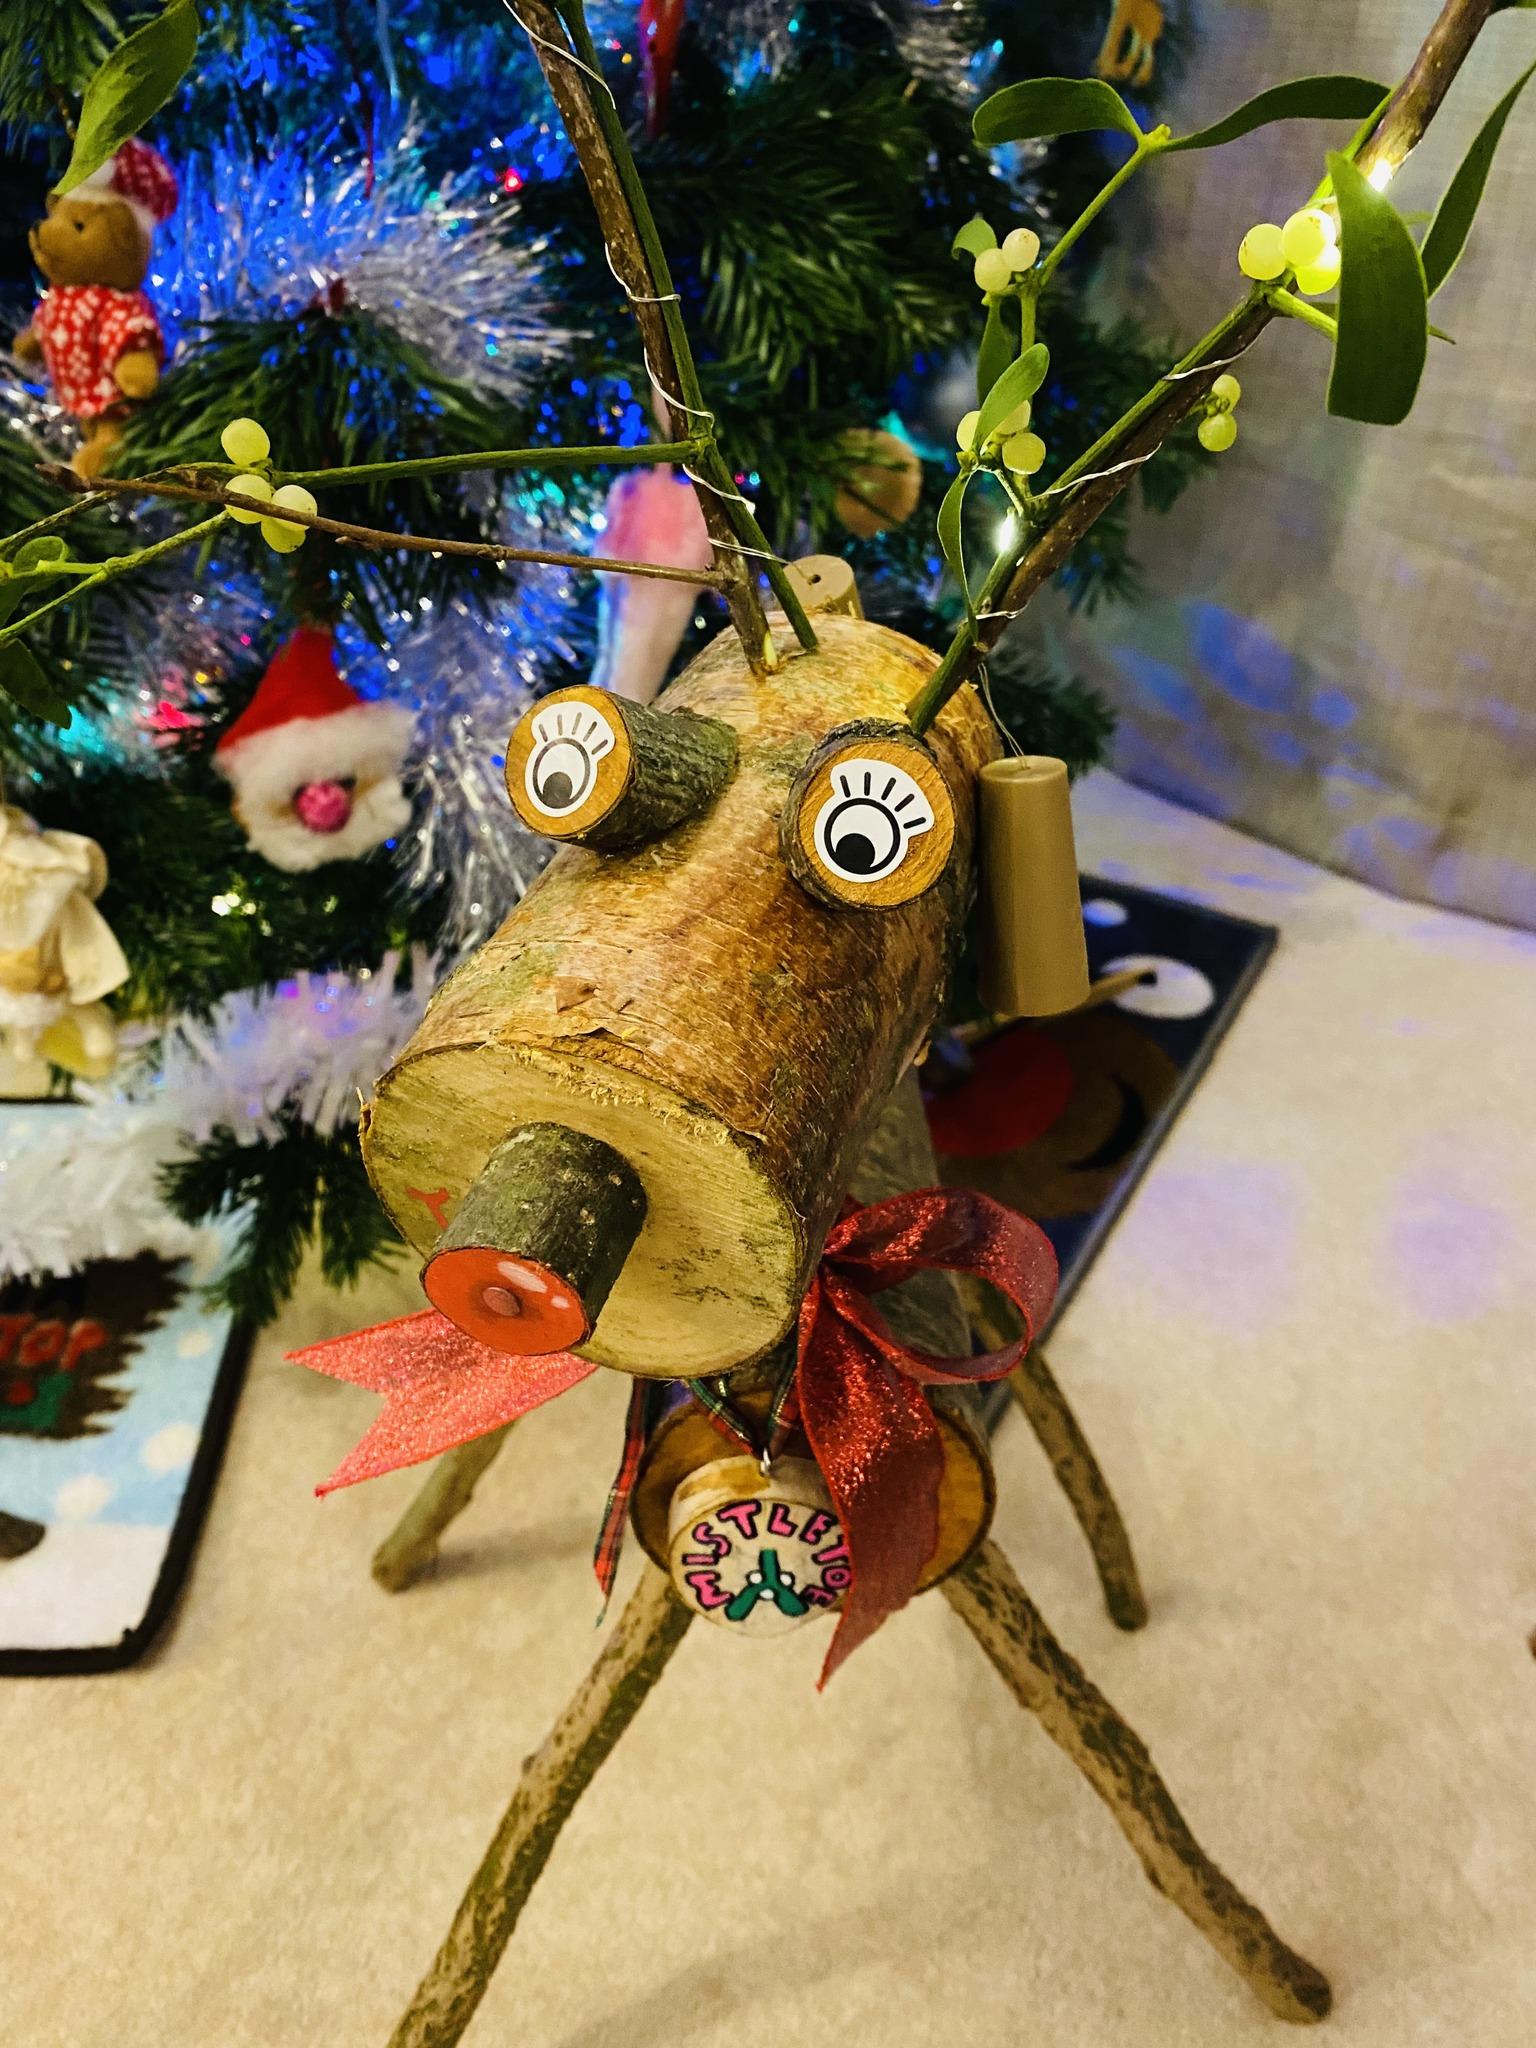 A homemade reindeer, covered in festive decoration, standing next to a Christmas tree